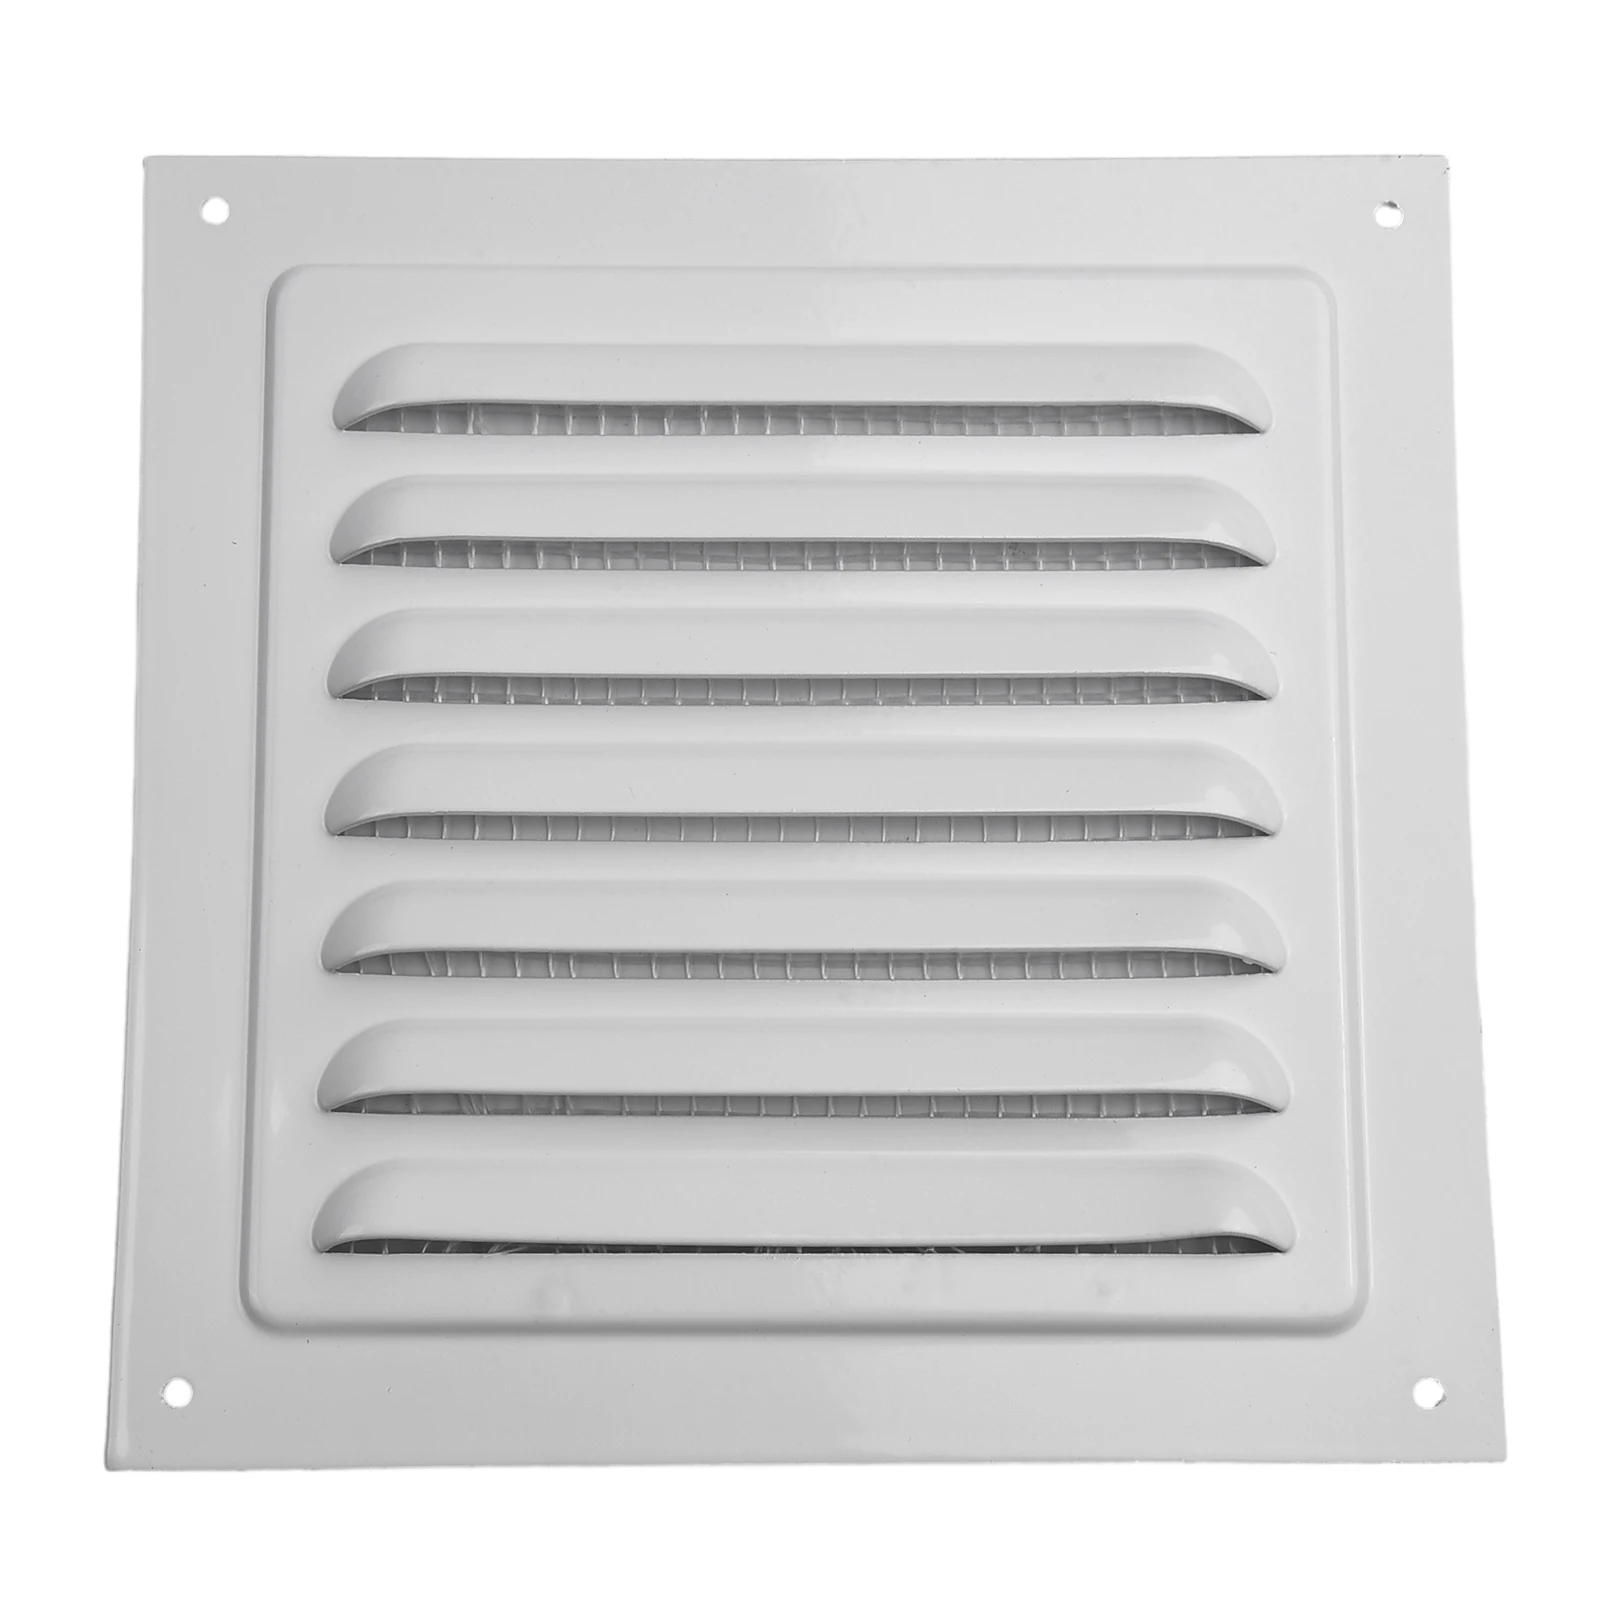 

Lightweight and Long lasting Aluminum Metal Louver Vent Insect Screen Cover Perfect for Duct Vents and Openings